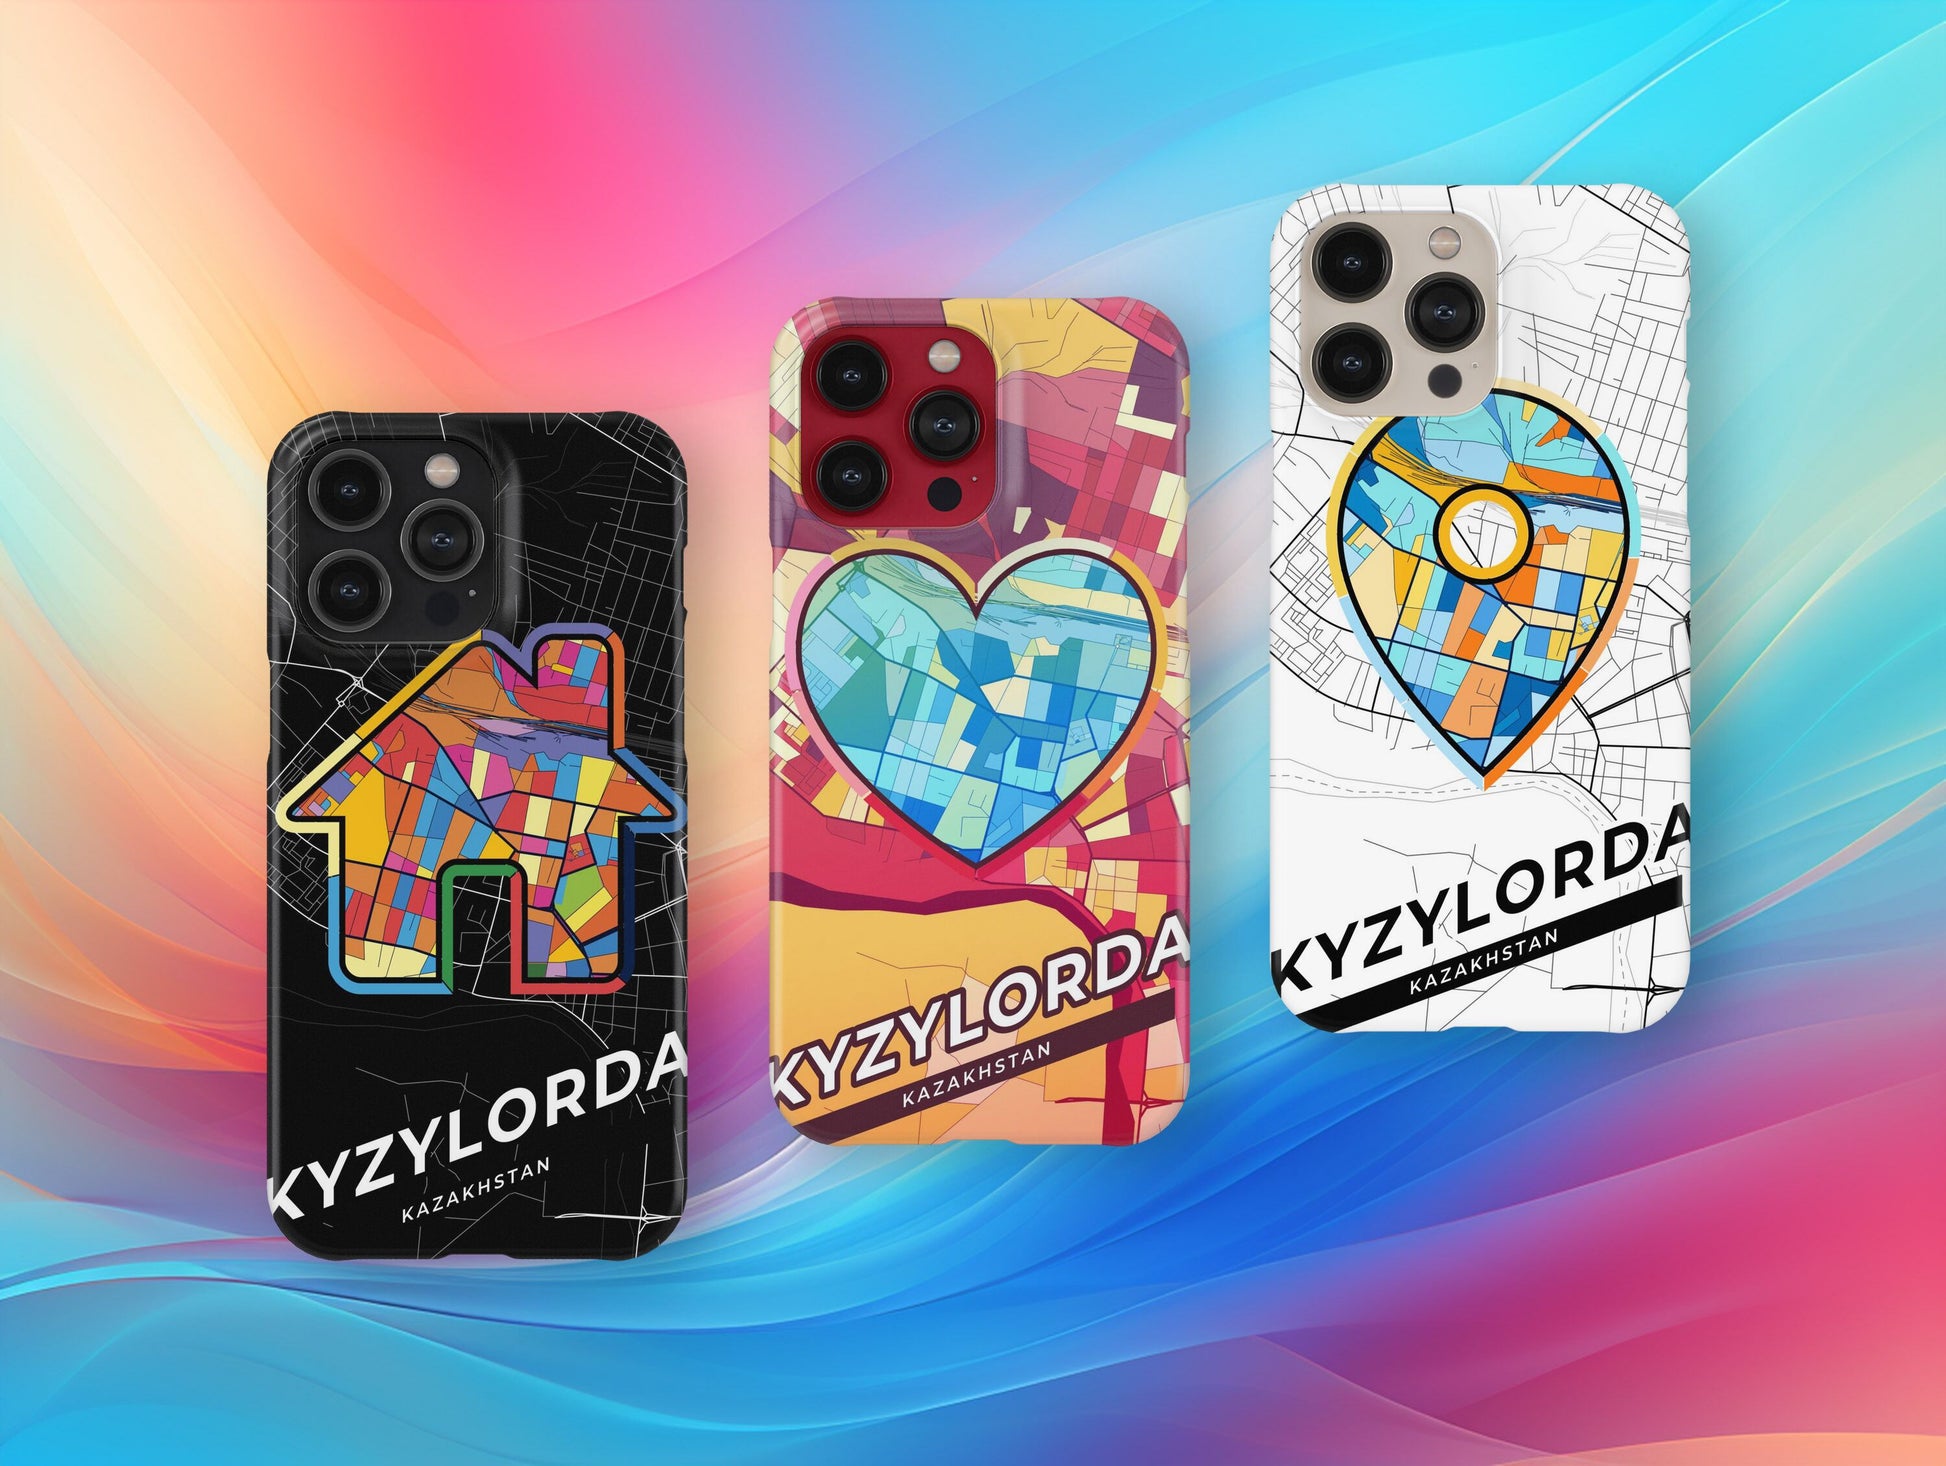 Kyzylorda Kazakhstan slim phone case with colorful icon. Birthday, wedding or housewarming gift. Couple match cases.